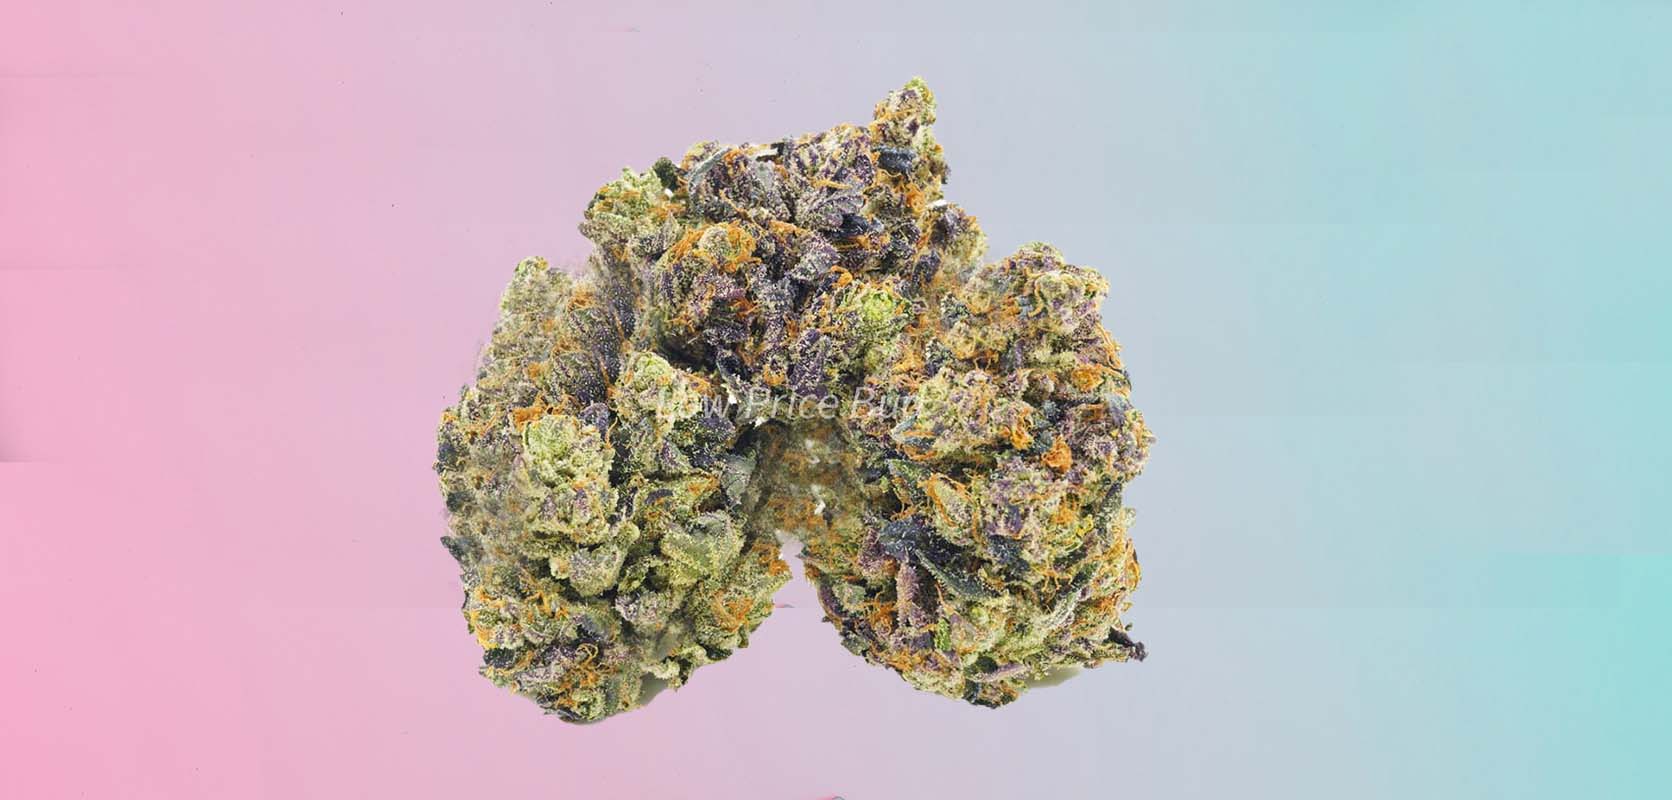 image of death punch strain cheap weed for sale. buy cheap weed online from low price bud canada.